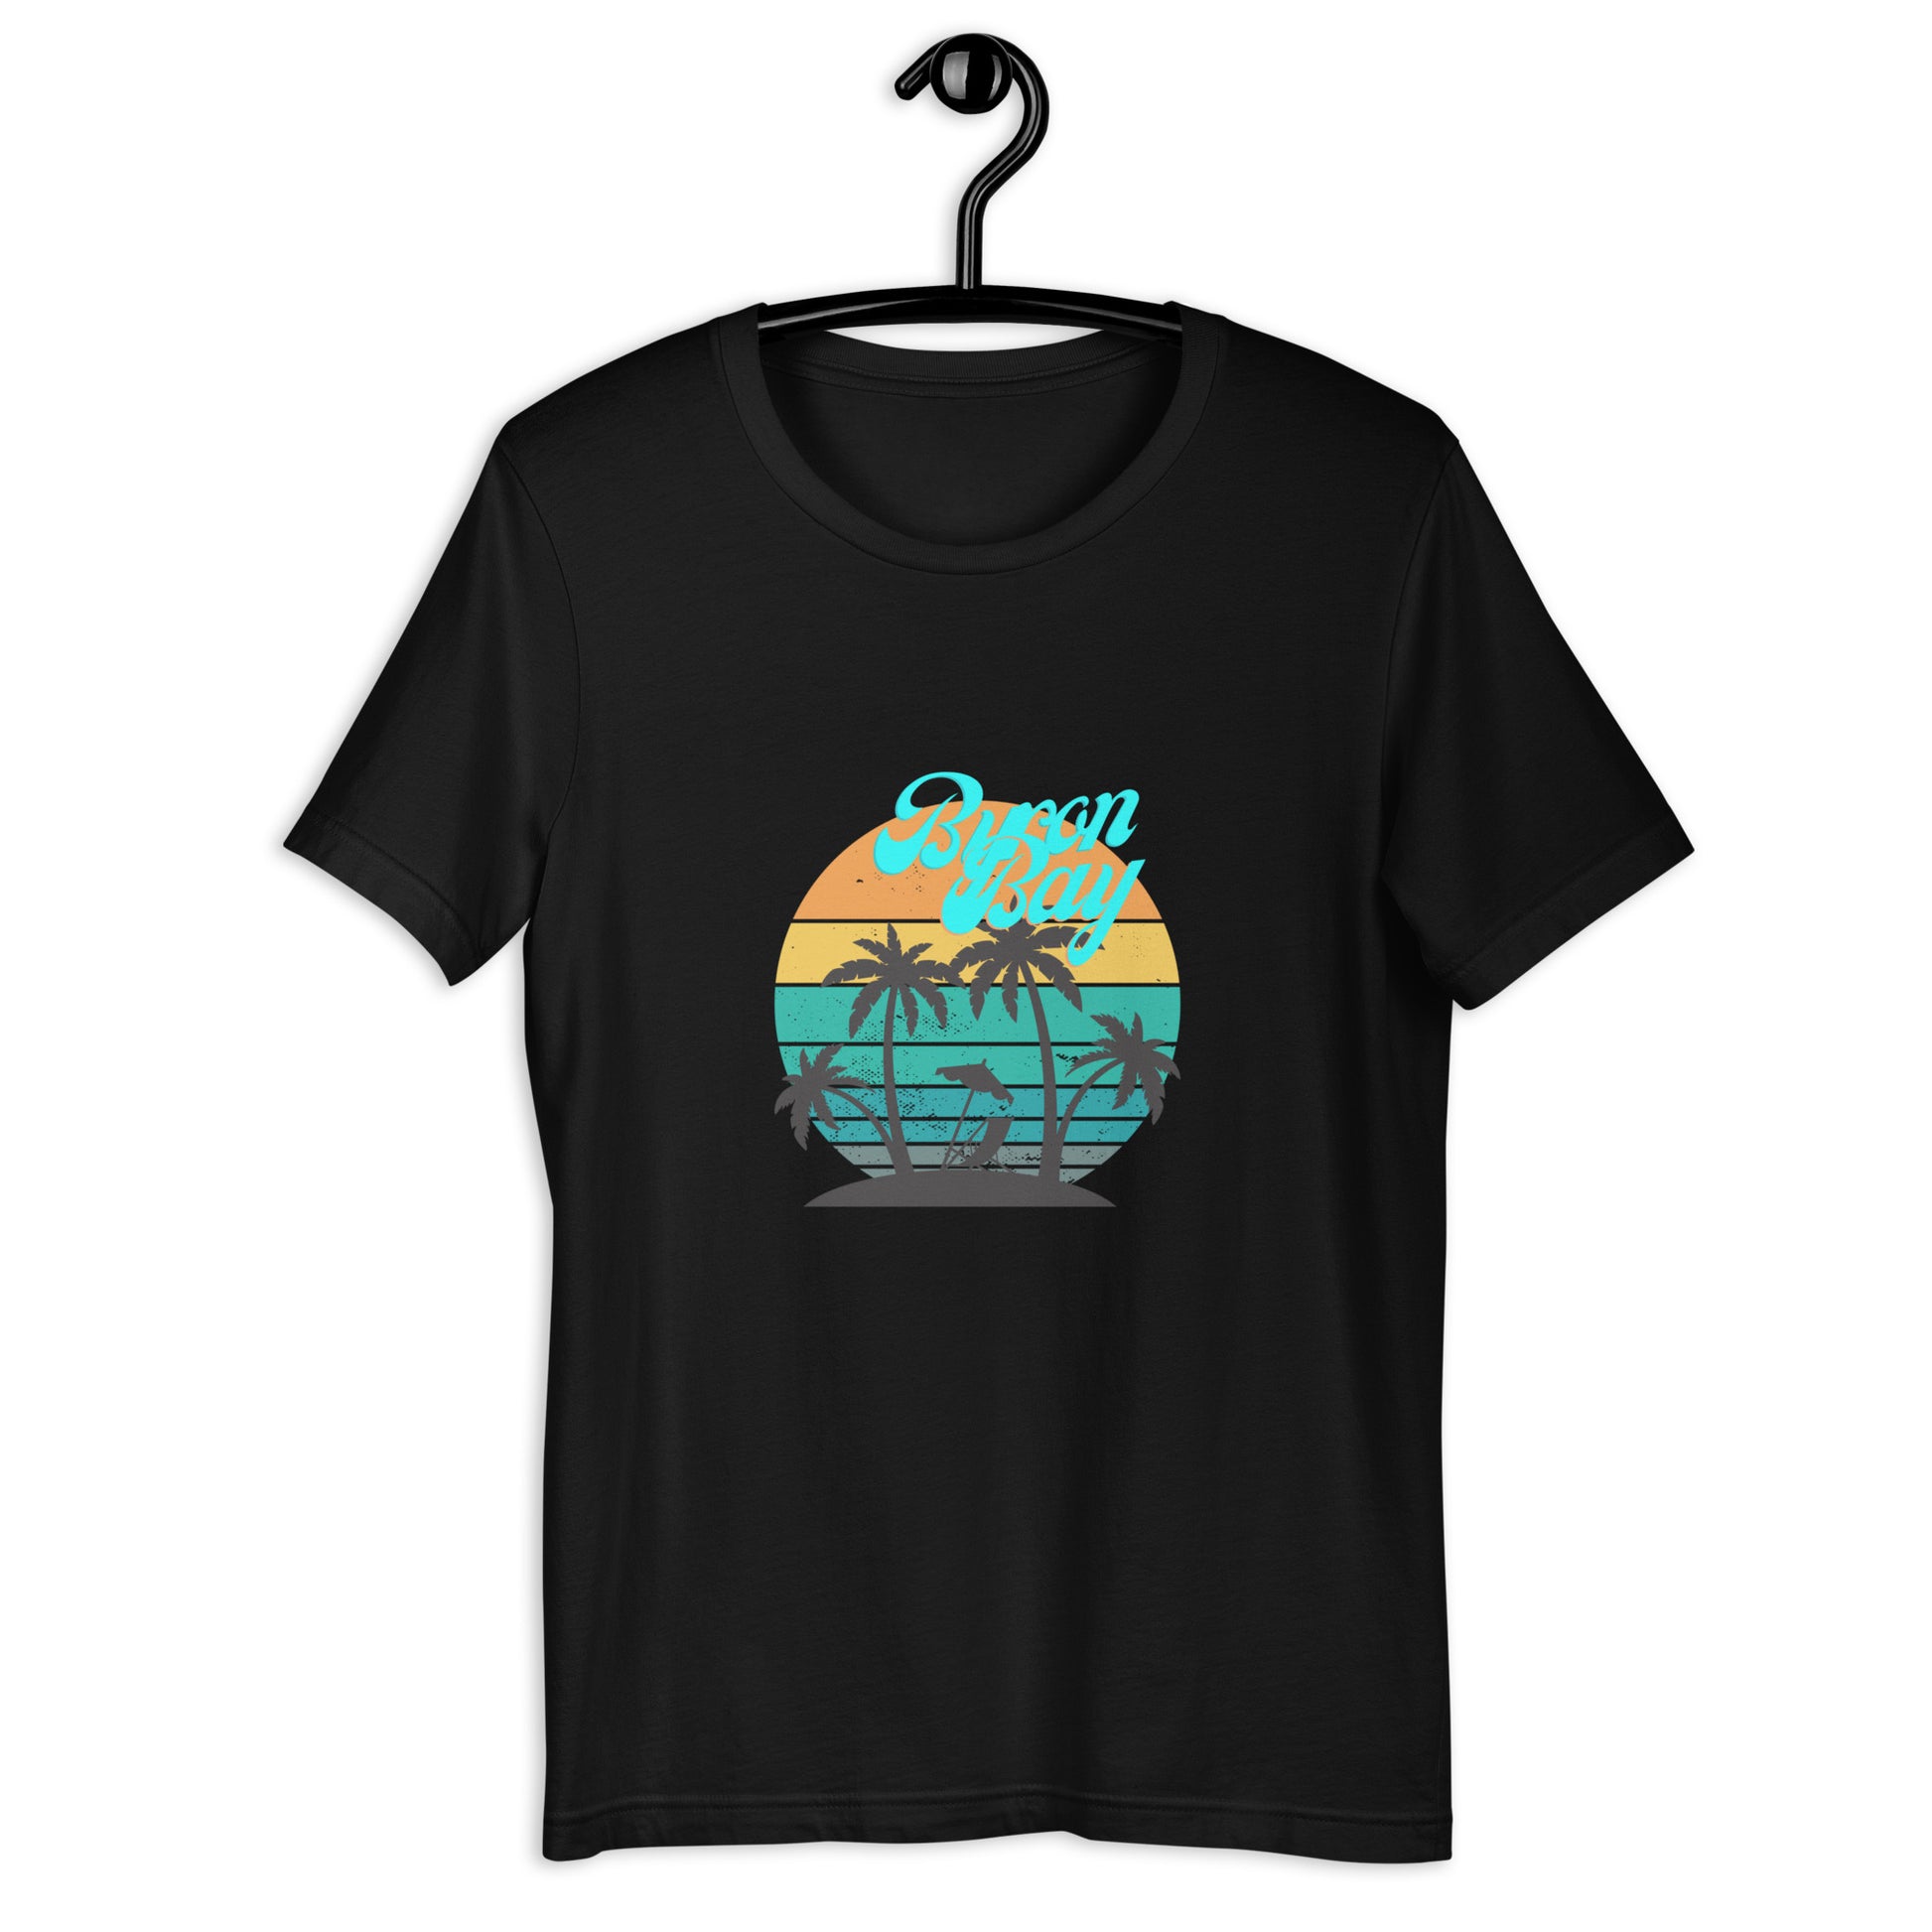  Unisex T-Shirt - Black - Front flat lay view - Byron Bay design on front - Genuine Byron Bay Merchandise | Produced by Go Sea Kayak Byron Bay 